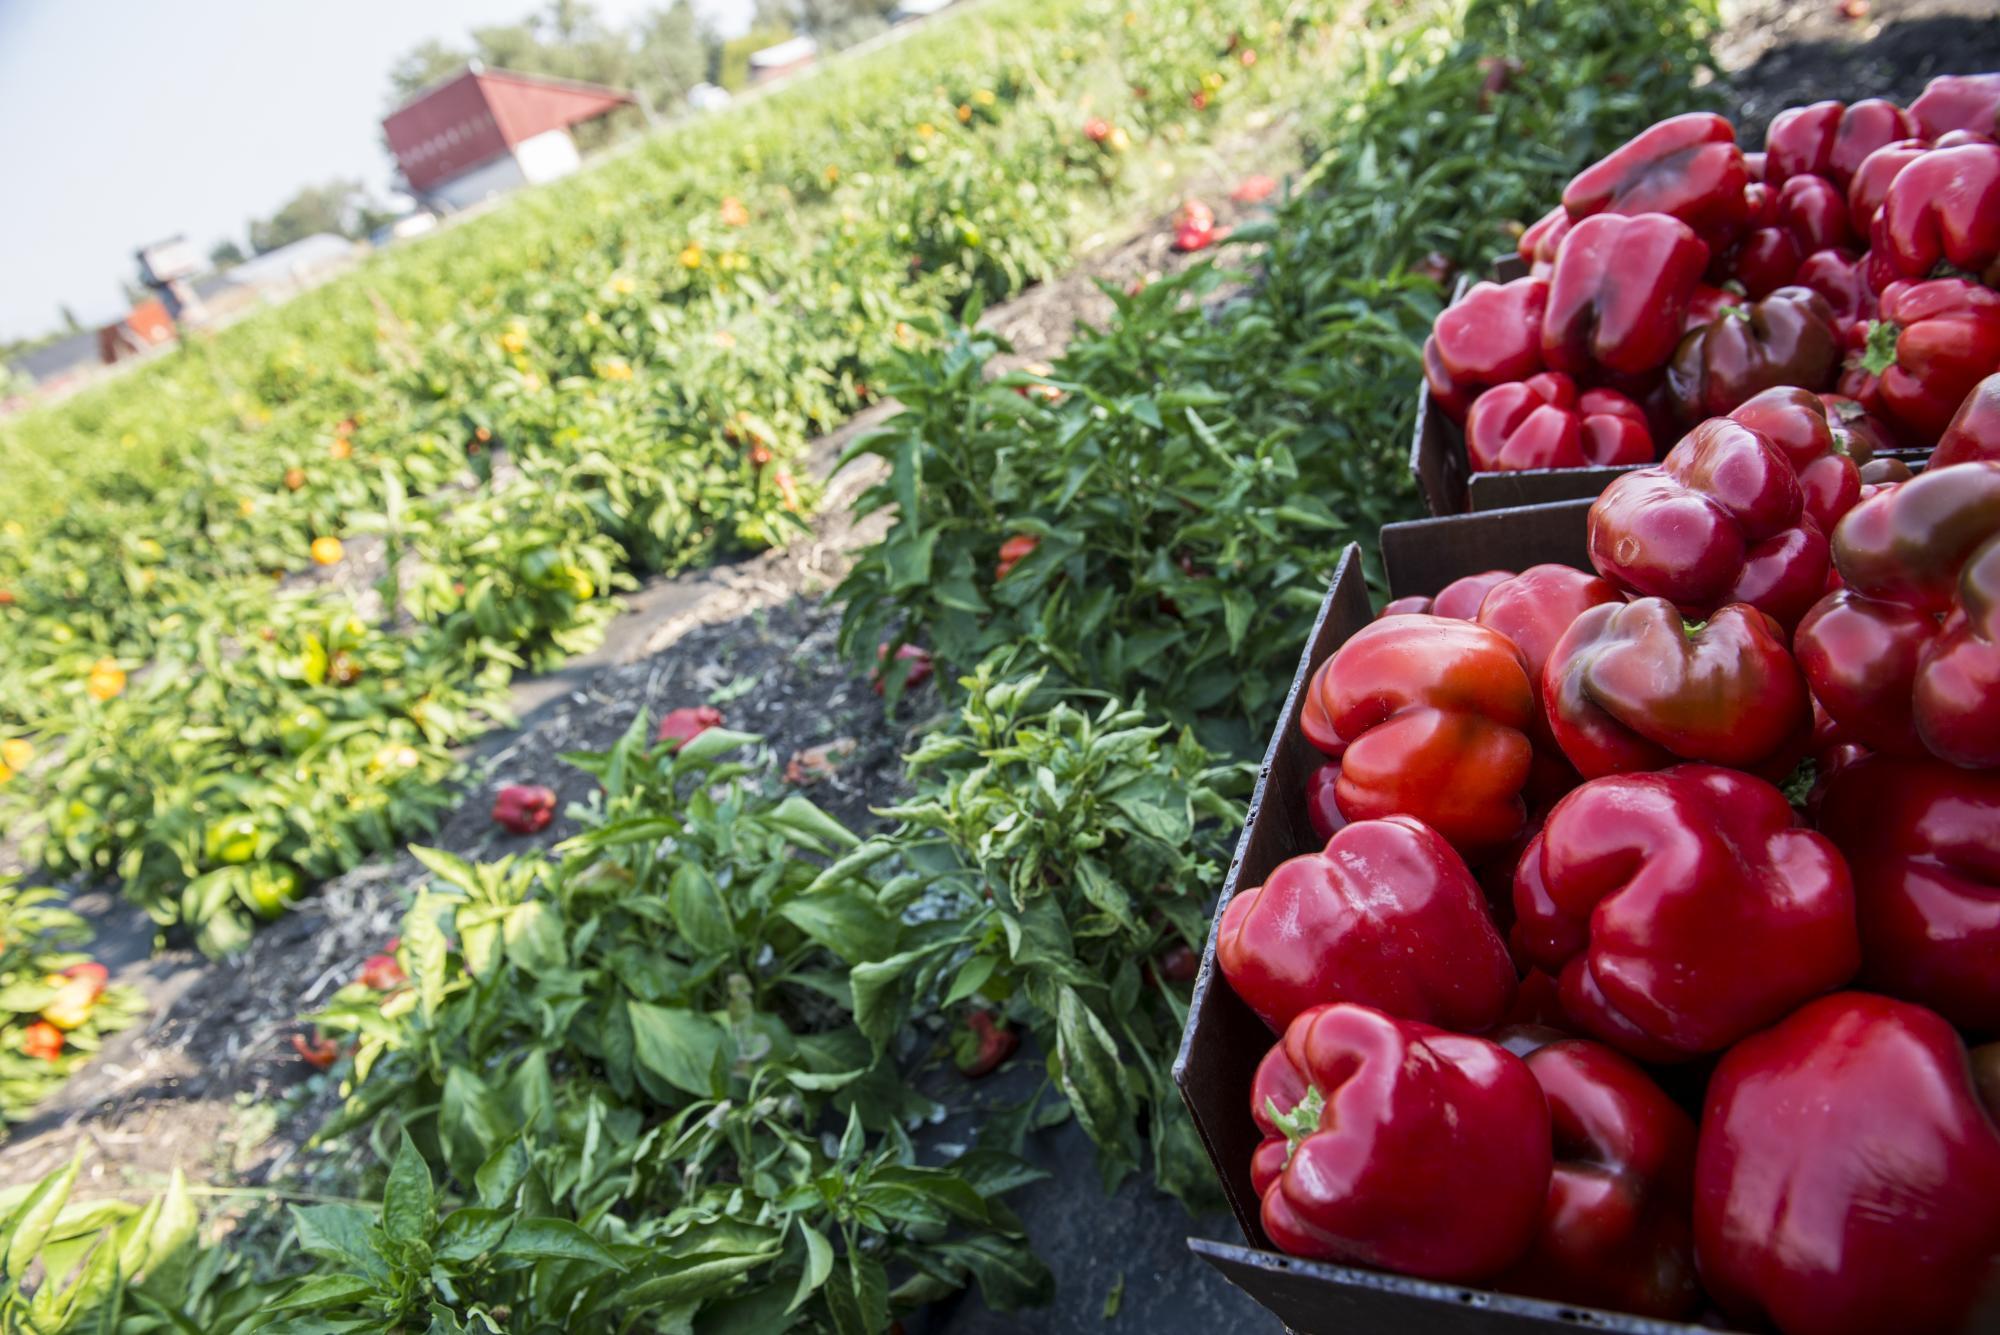 Harvesting organic red peppers at the Fry Family Farm in Medford, Oregon.